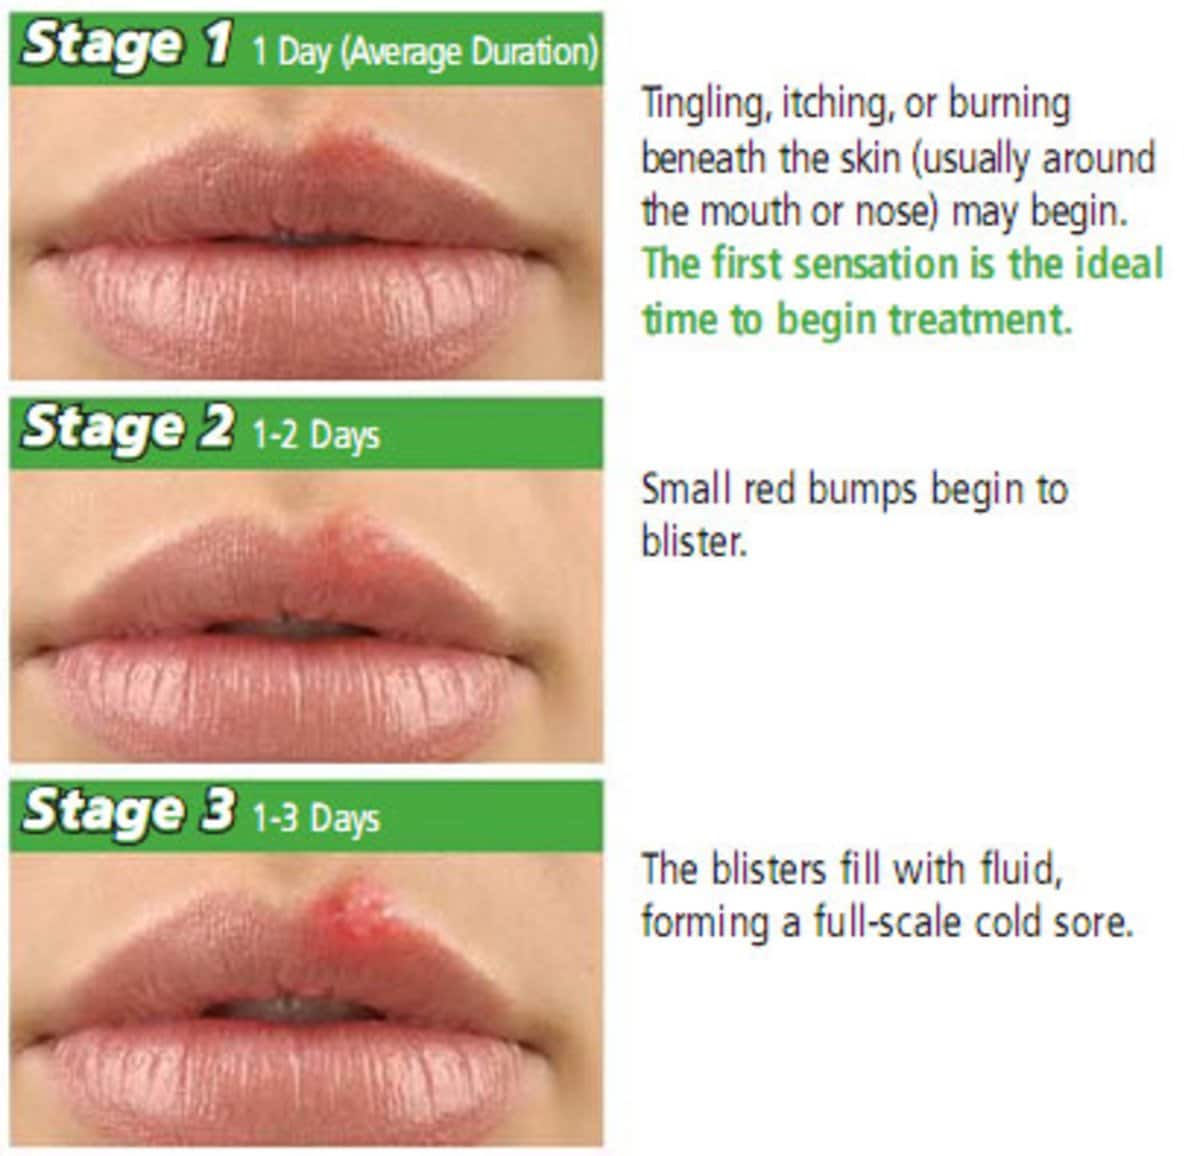 What Causes Herpes Outbreak On Lips